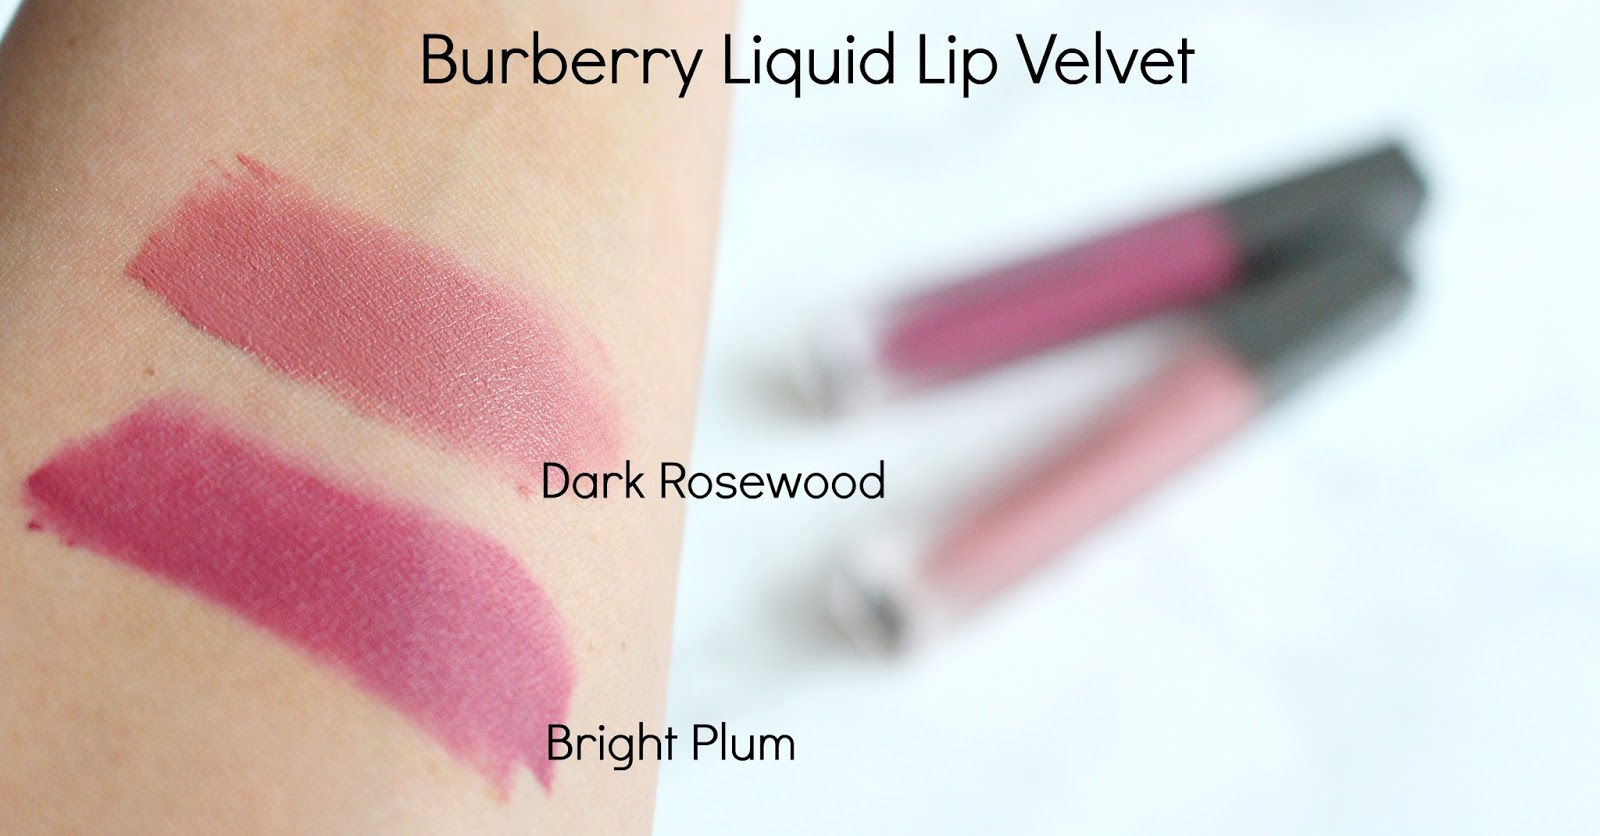 Samantha Jane Burberry Liquid Lip Velvet Swatches And Review